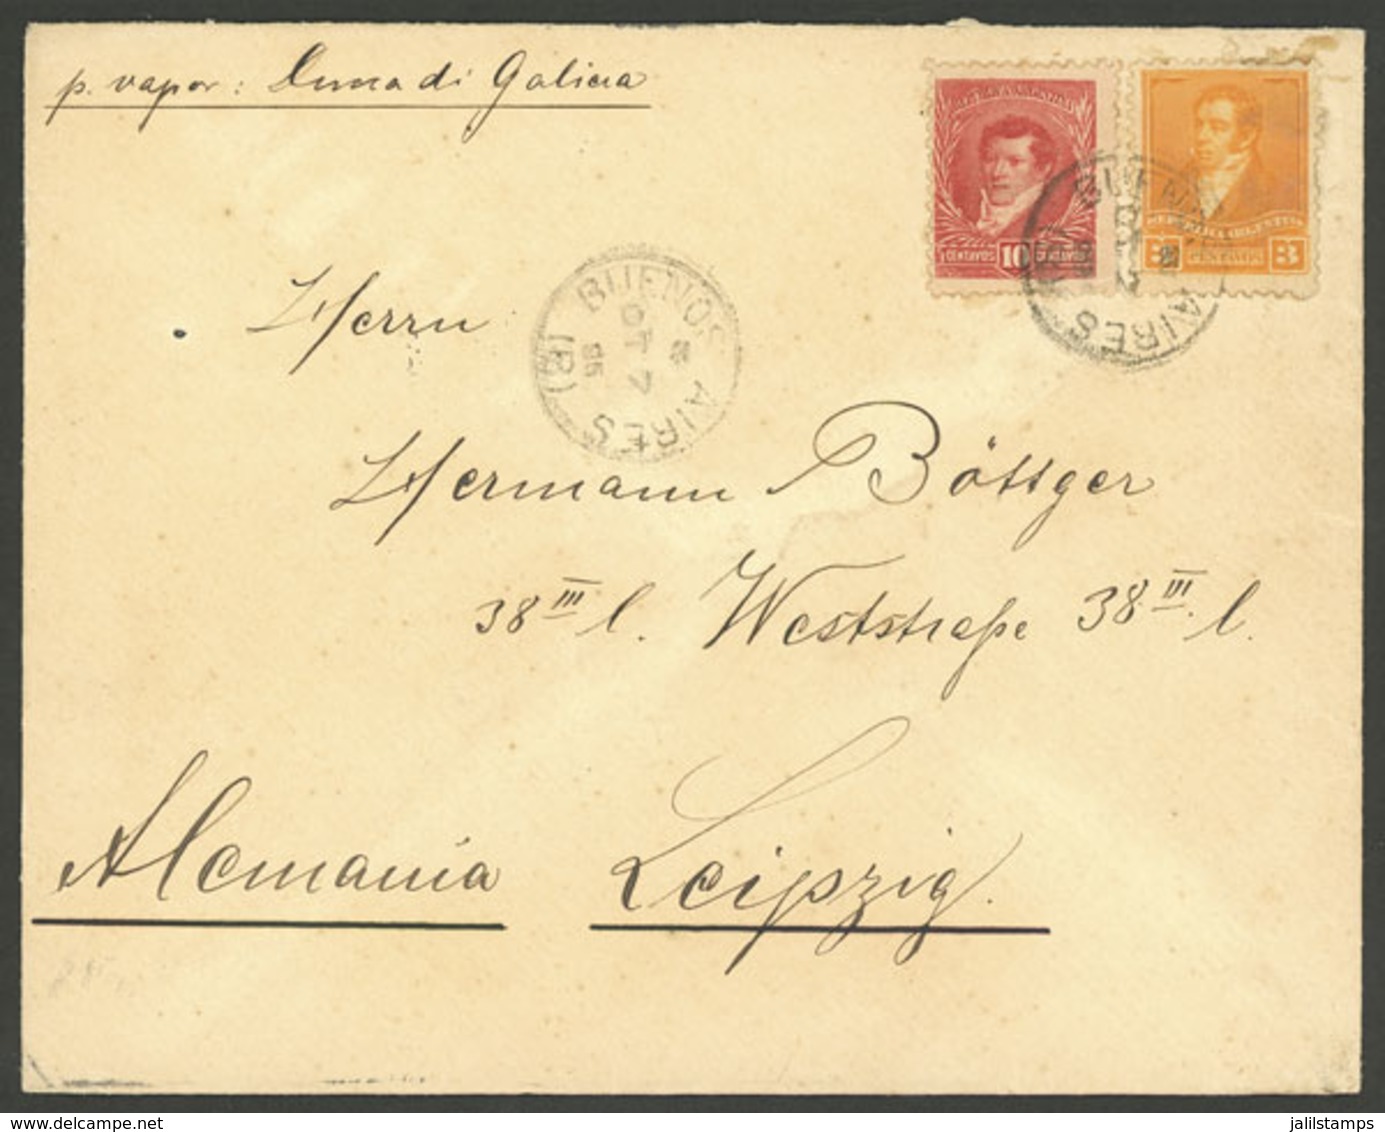 ARGENTINA: 7/OC/1896: Buenos Aires - Leipzig, Cover Franked With 13c., VF Quality - Brieven En Documenten